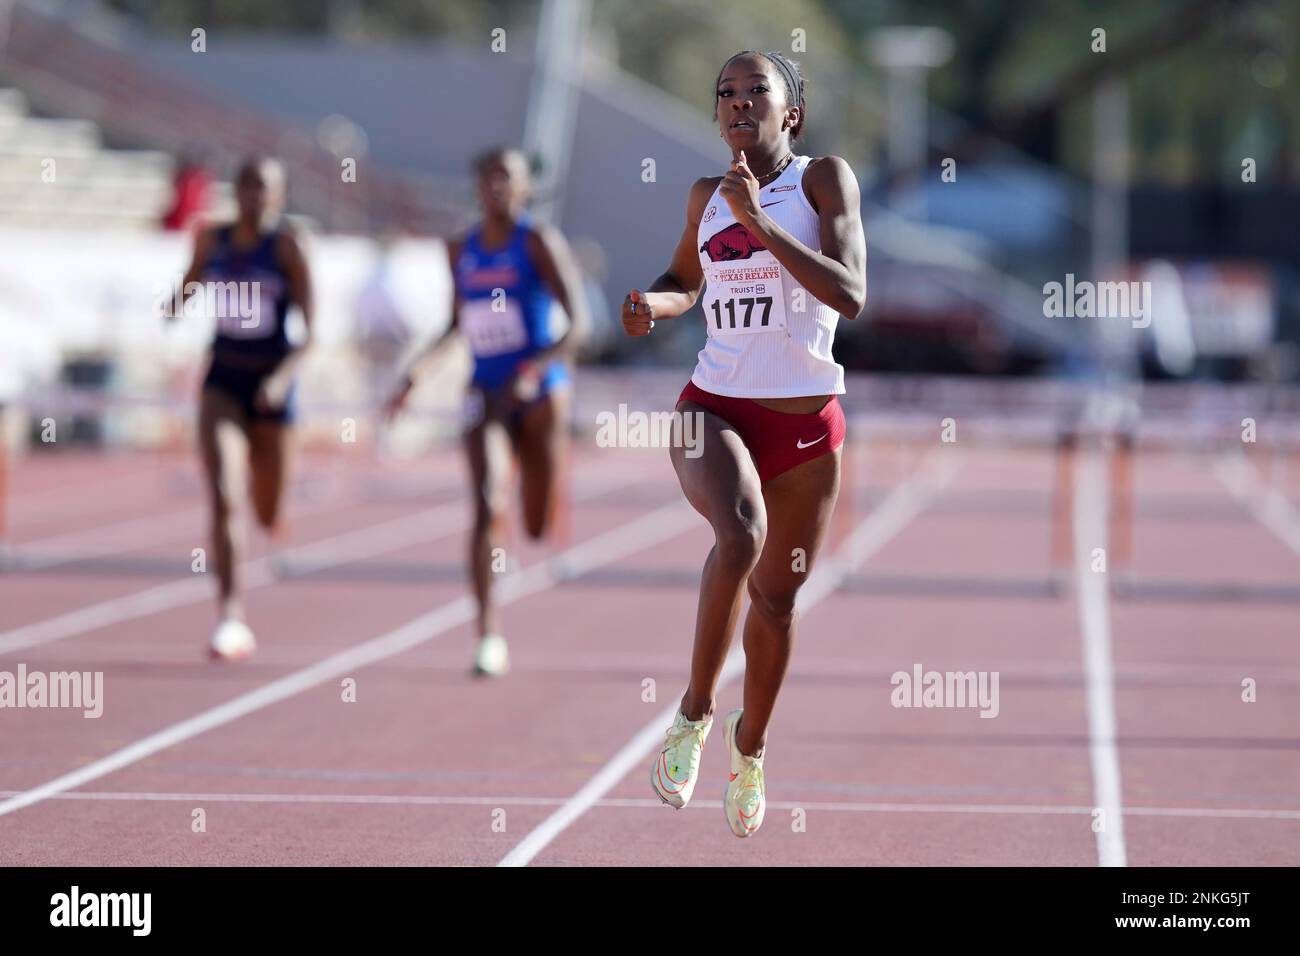 Britton Wilson of Arkansas wins the womens 400m hurdles in 54.37 during the 94th Clyde Littlefield Texas Relays, Friday, Mar 25, 2022, in Austin